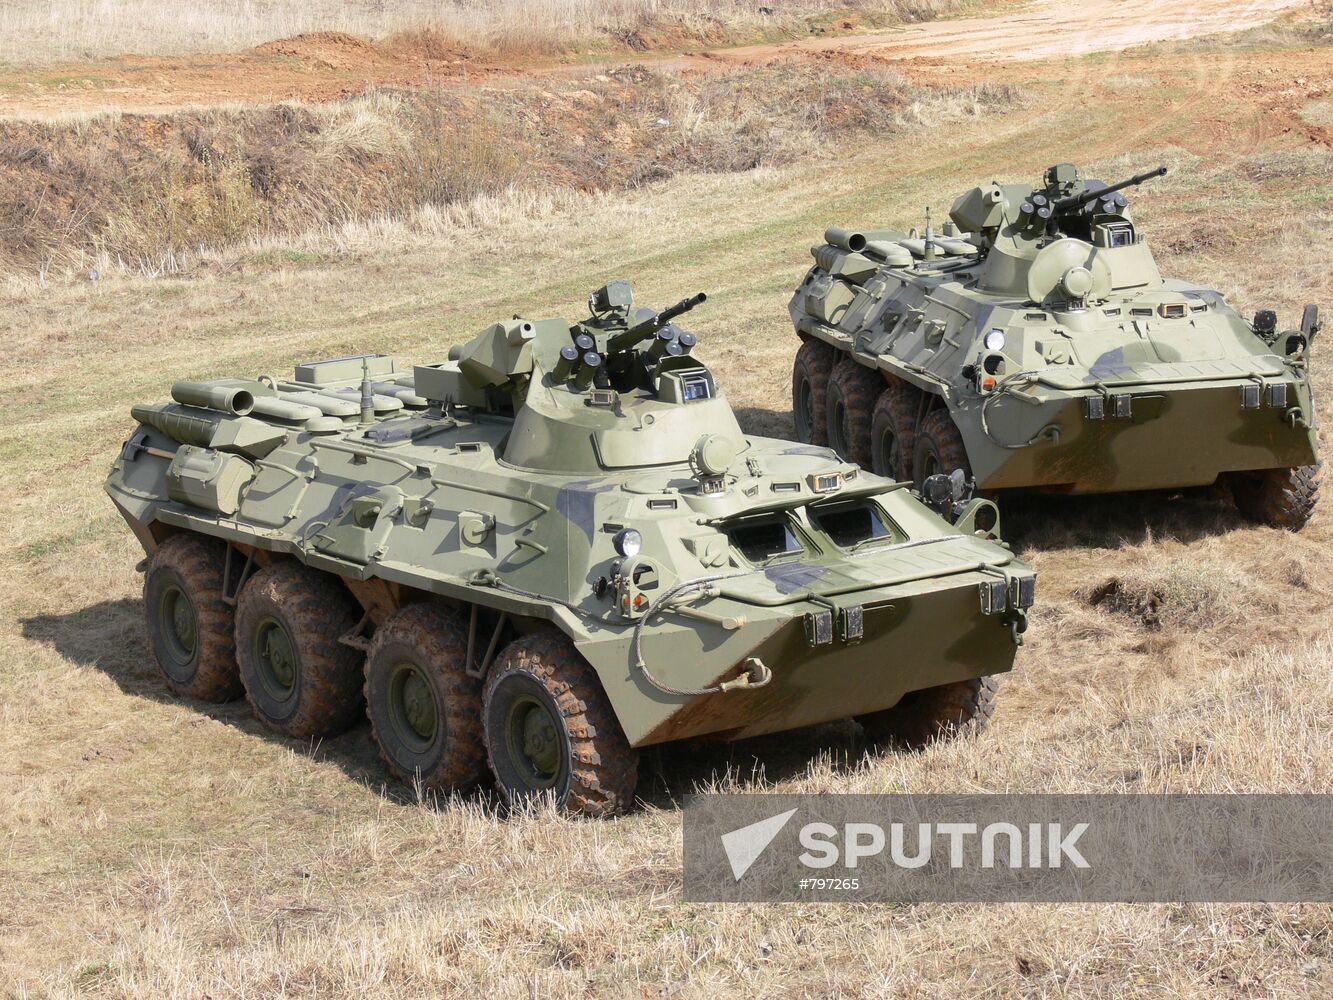 BTR-82 and BTR-82A armored personnel carriers